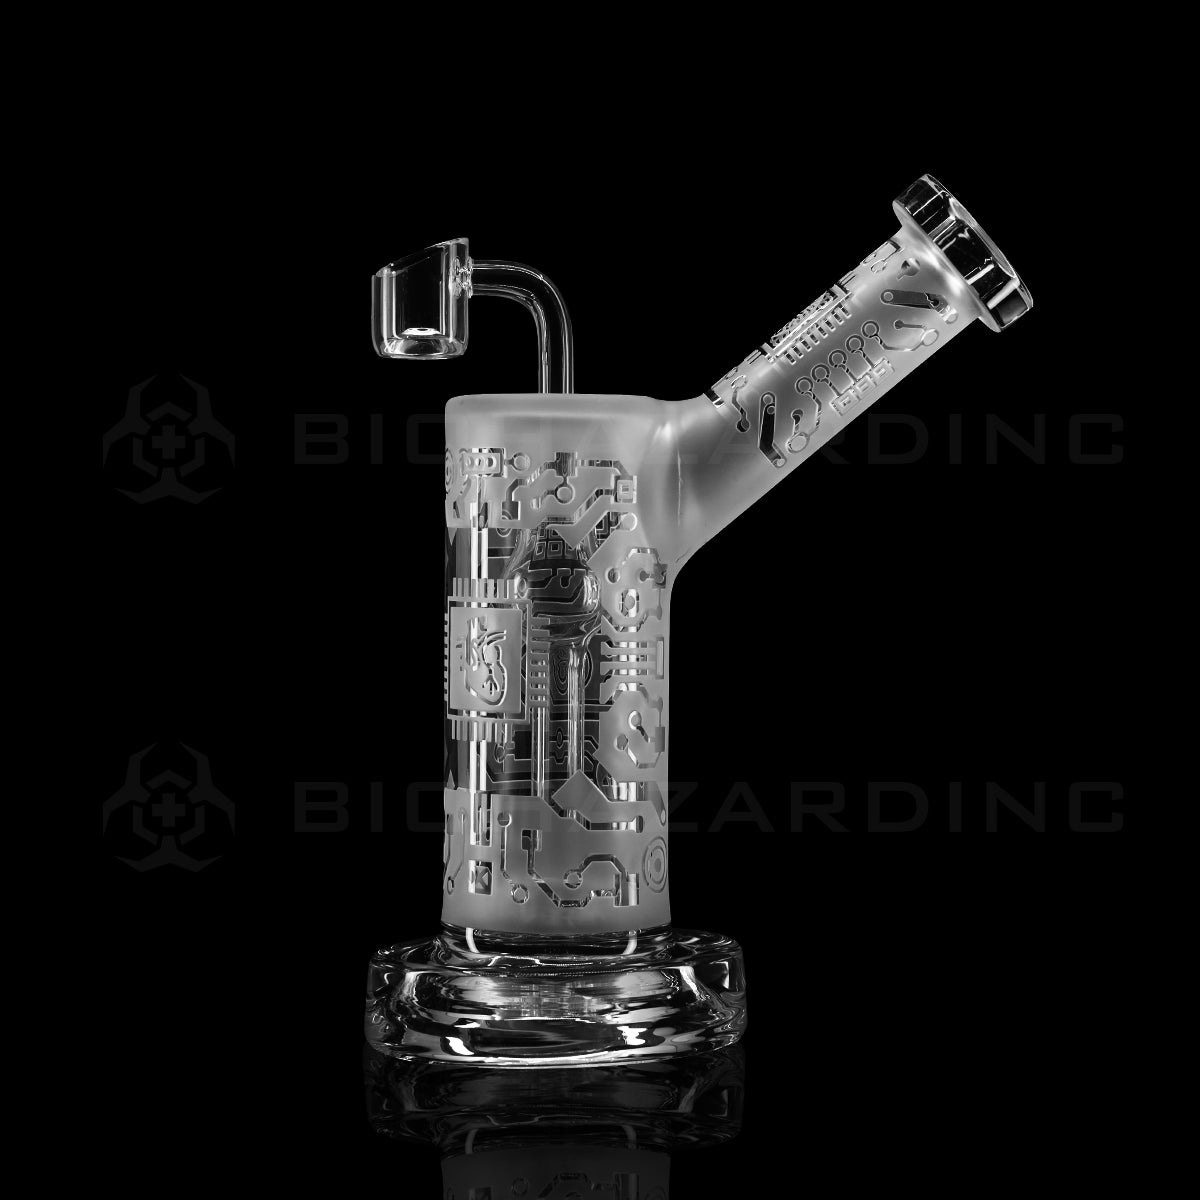 Using Your Bong or Bubbler as a Dab Rig – Purr Glass